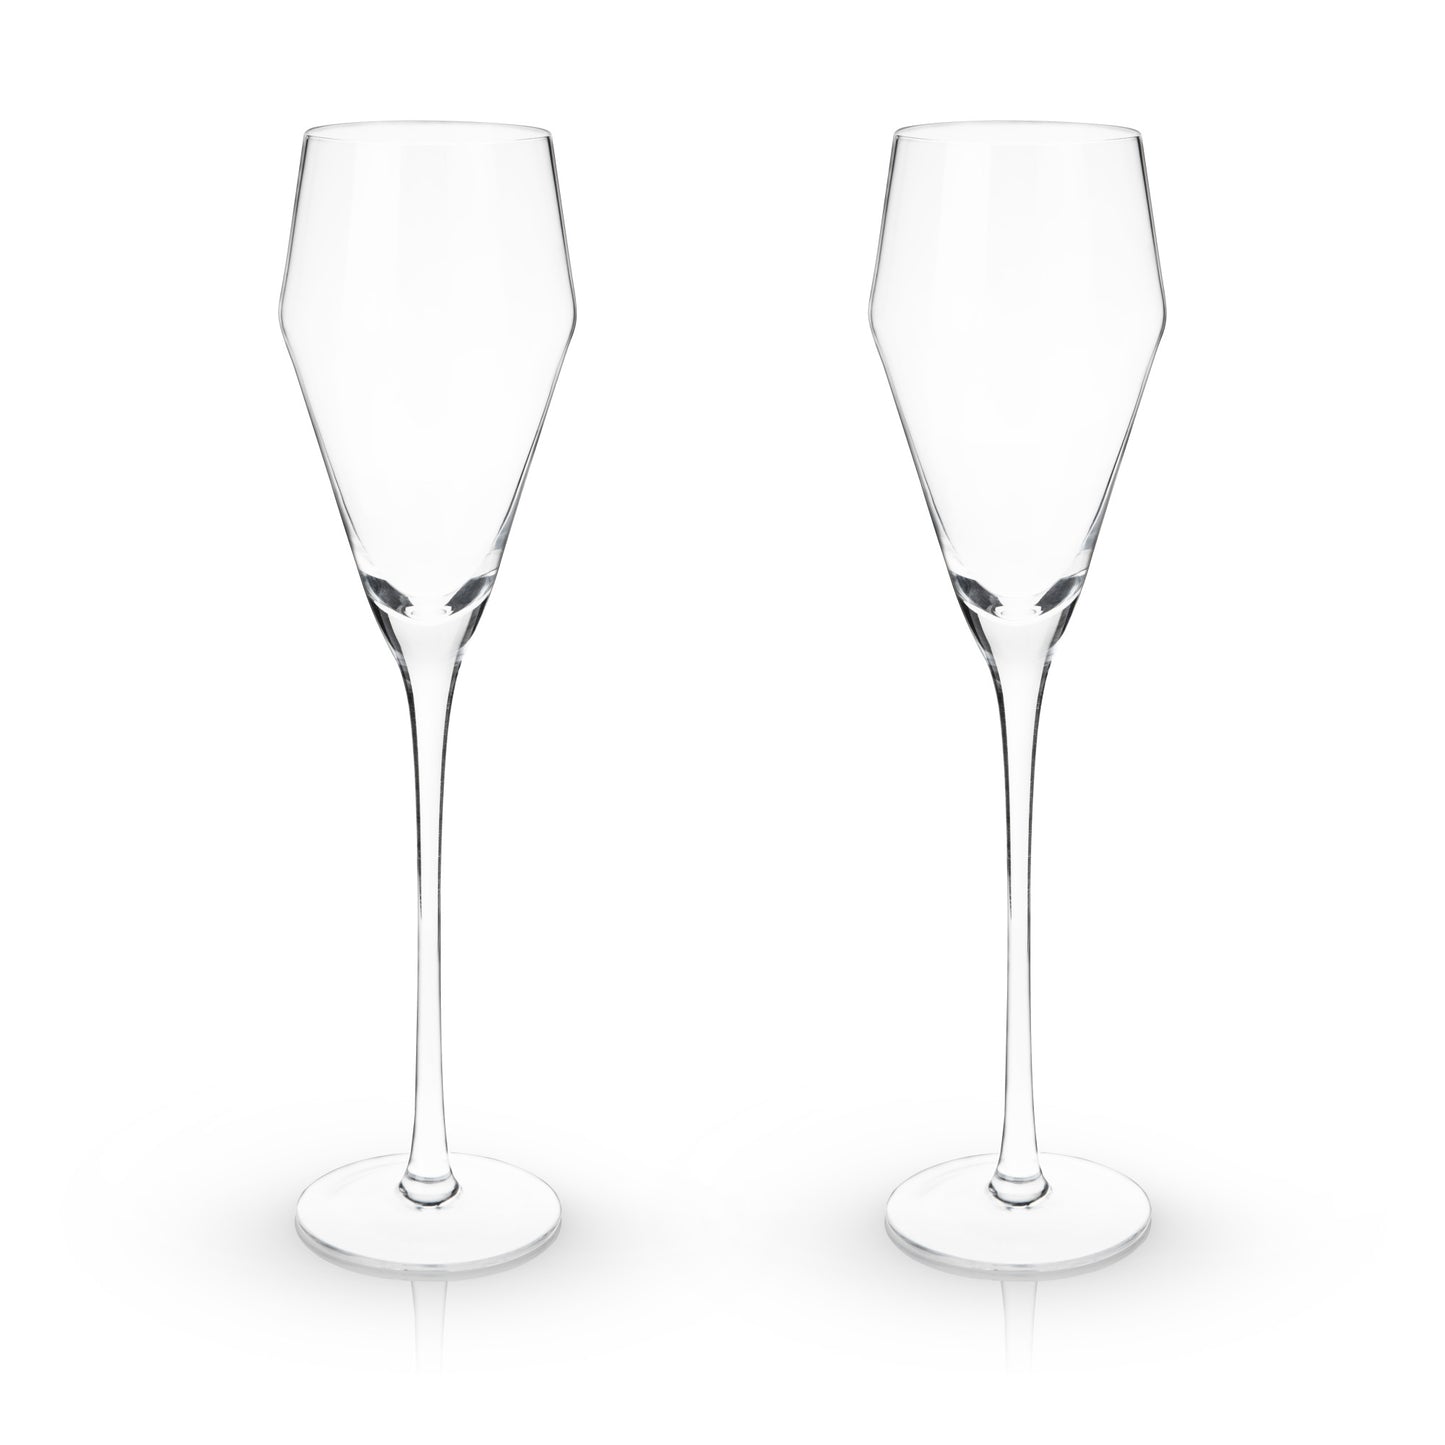 Angled Crystal Prosecco Glasses